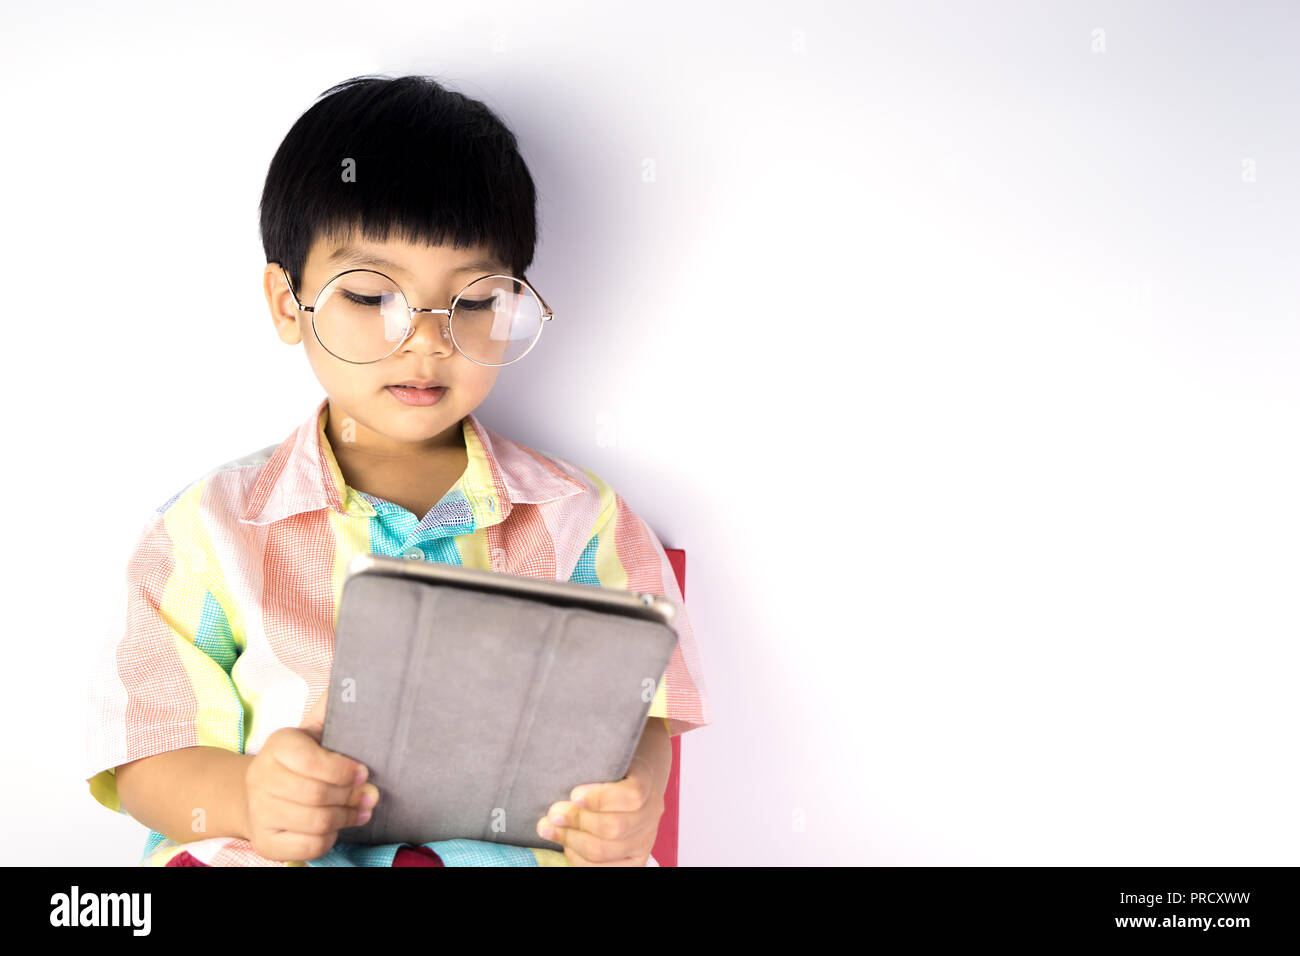 Nerdy Asian boy is reading on tablet isolated Stock Photo